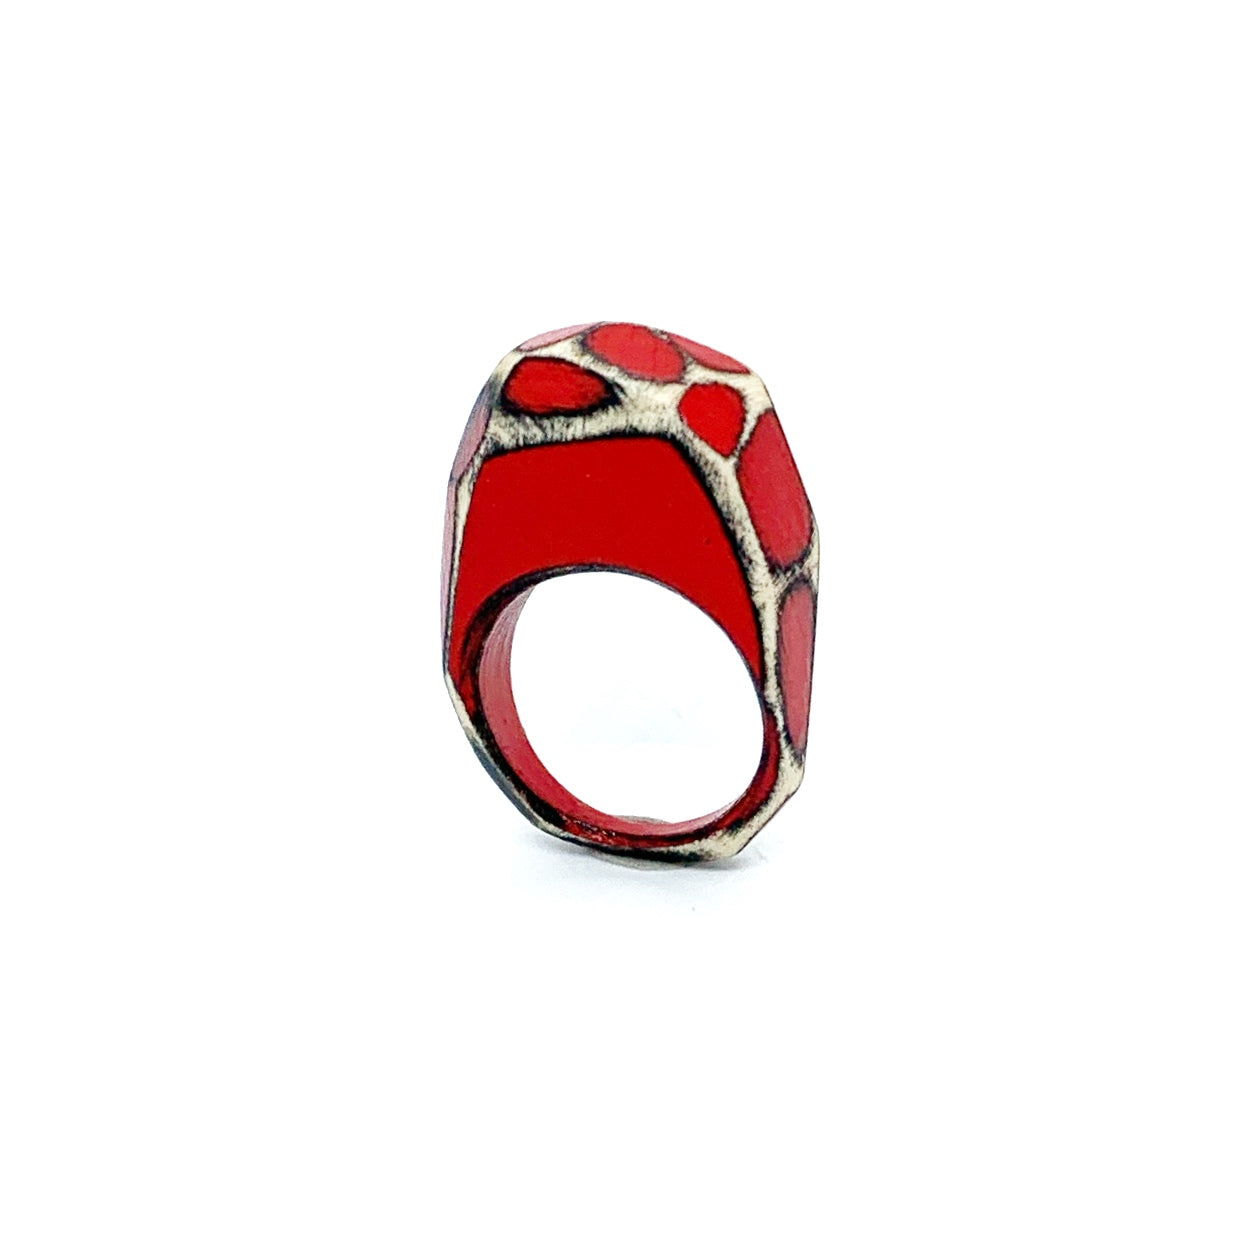 "Multifaceted Ring"